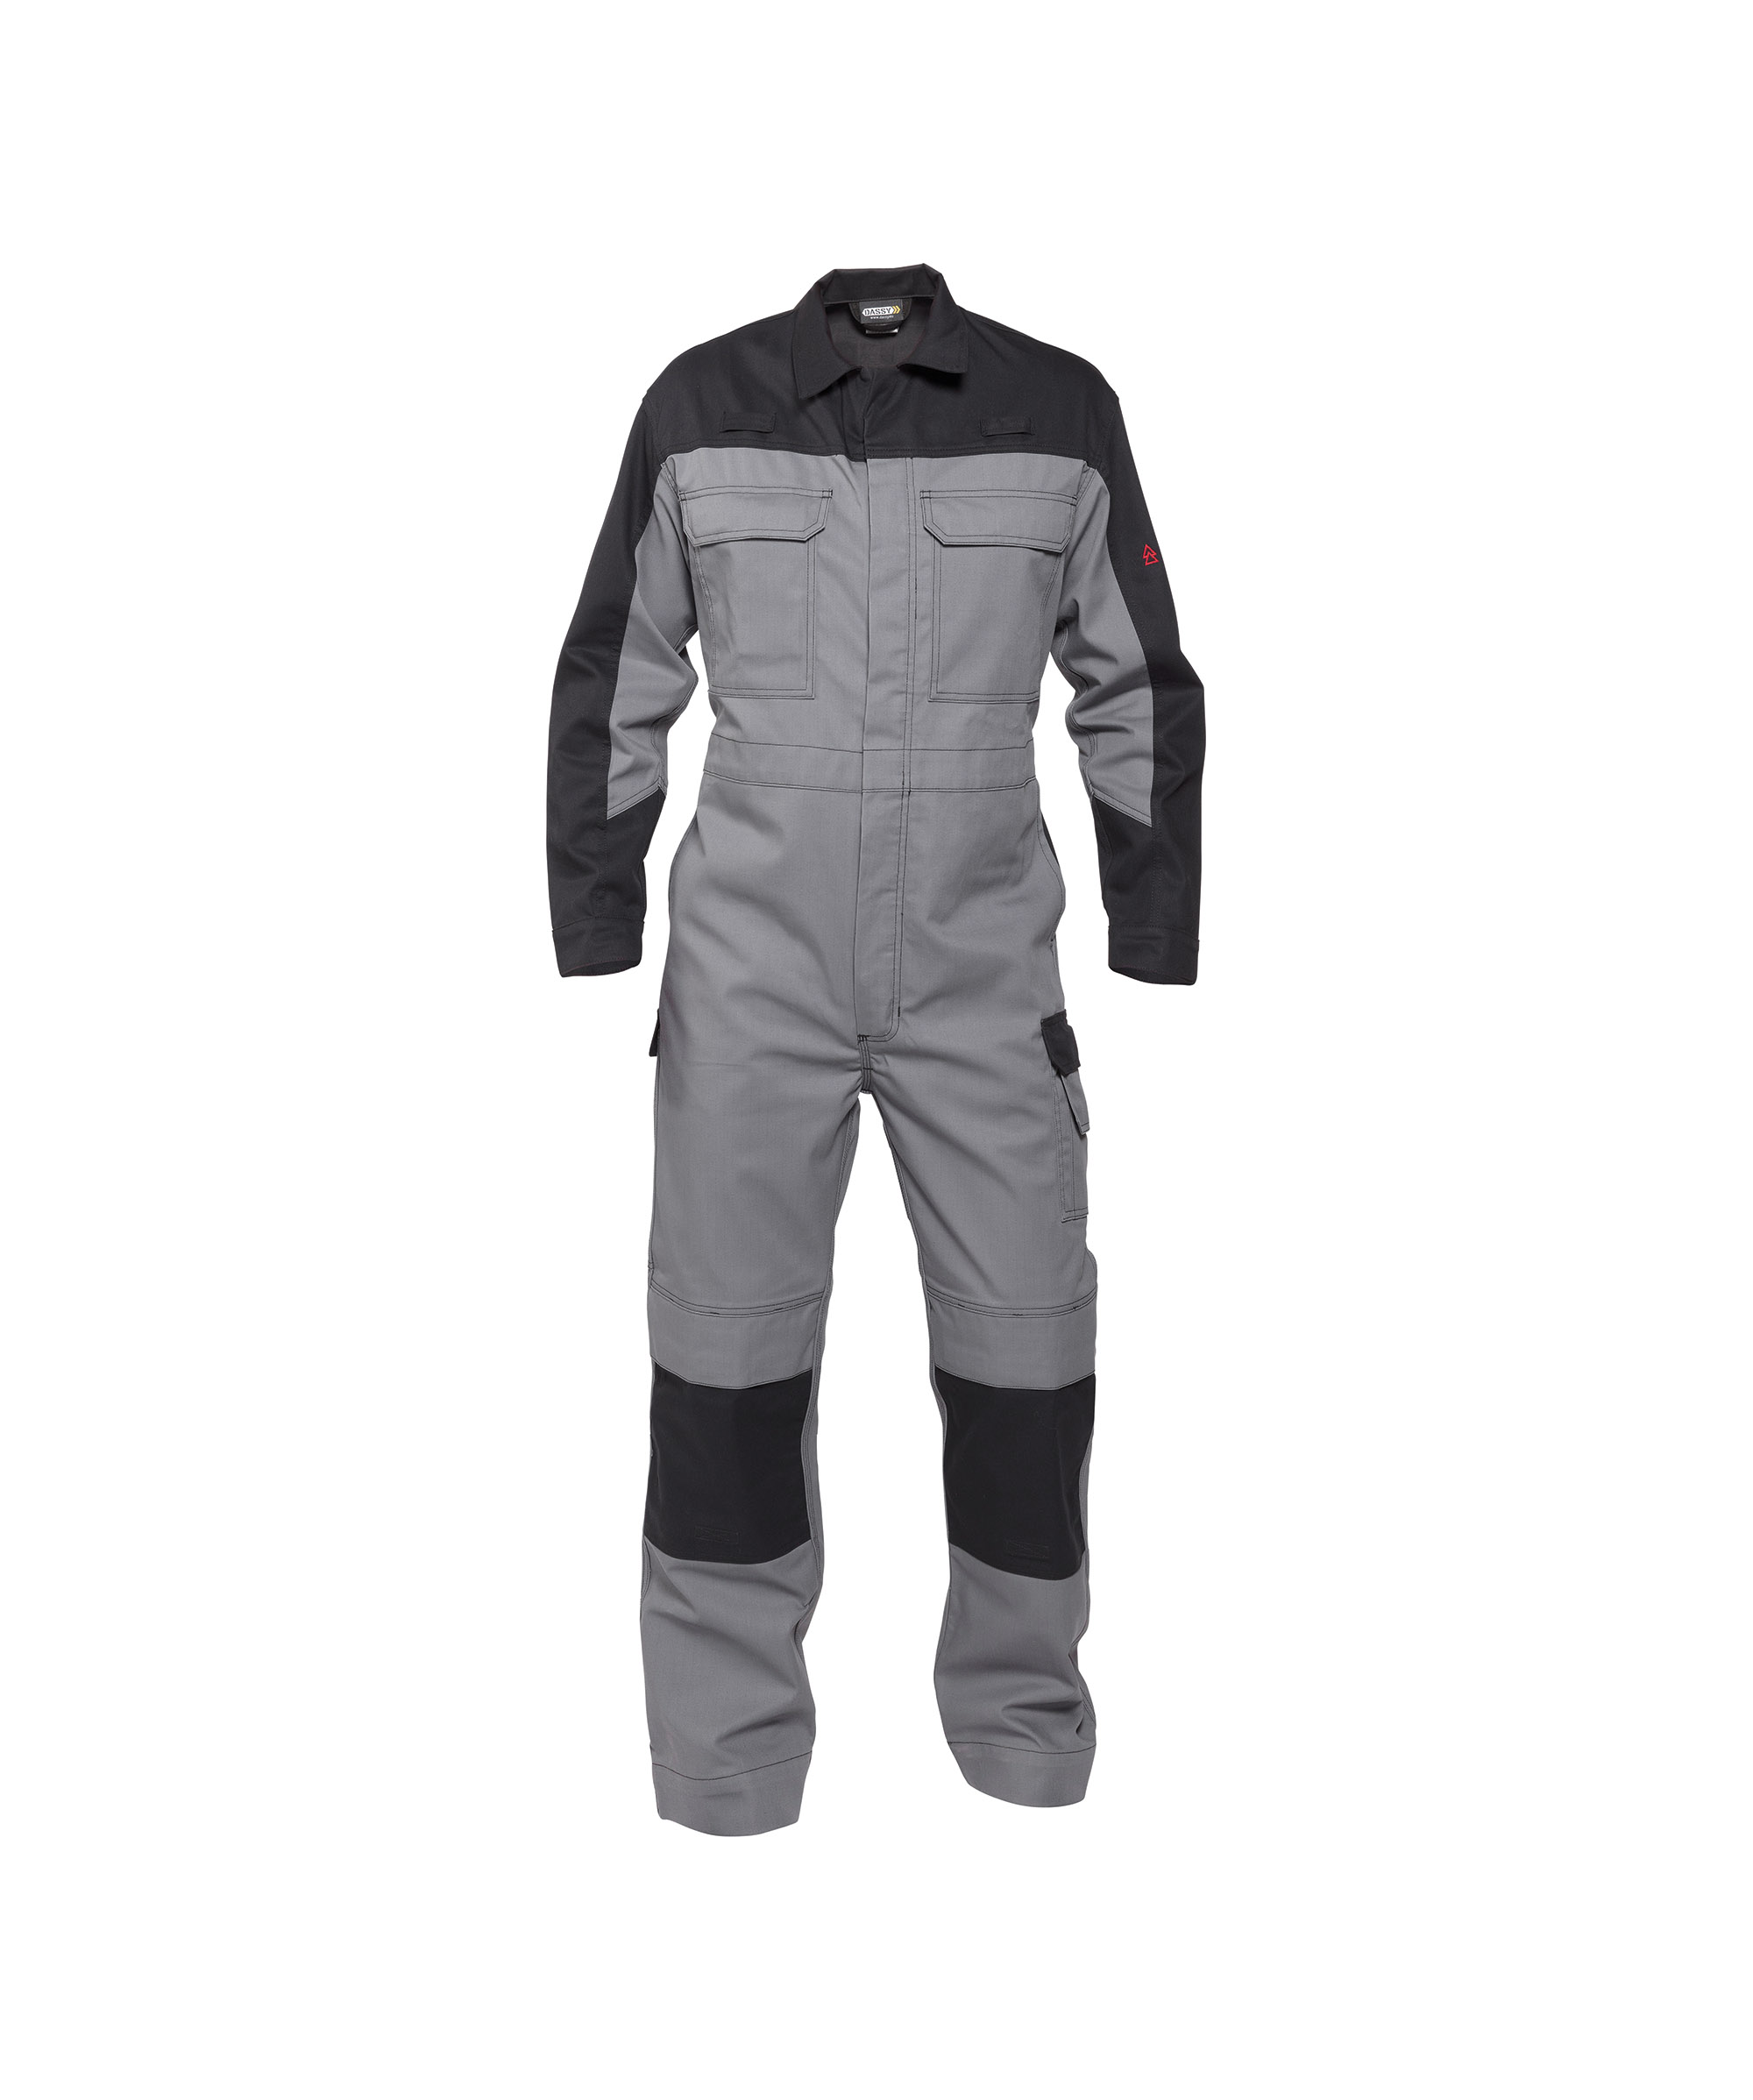 niort_two-tone-multinorm-overall-with-knee-pockets_graphite-grey-black_front.jpg